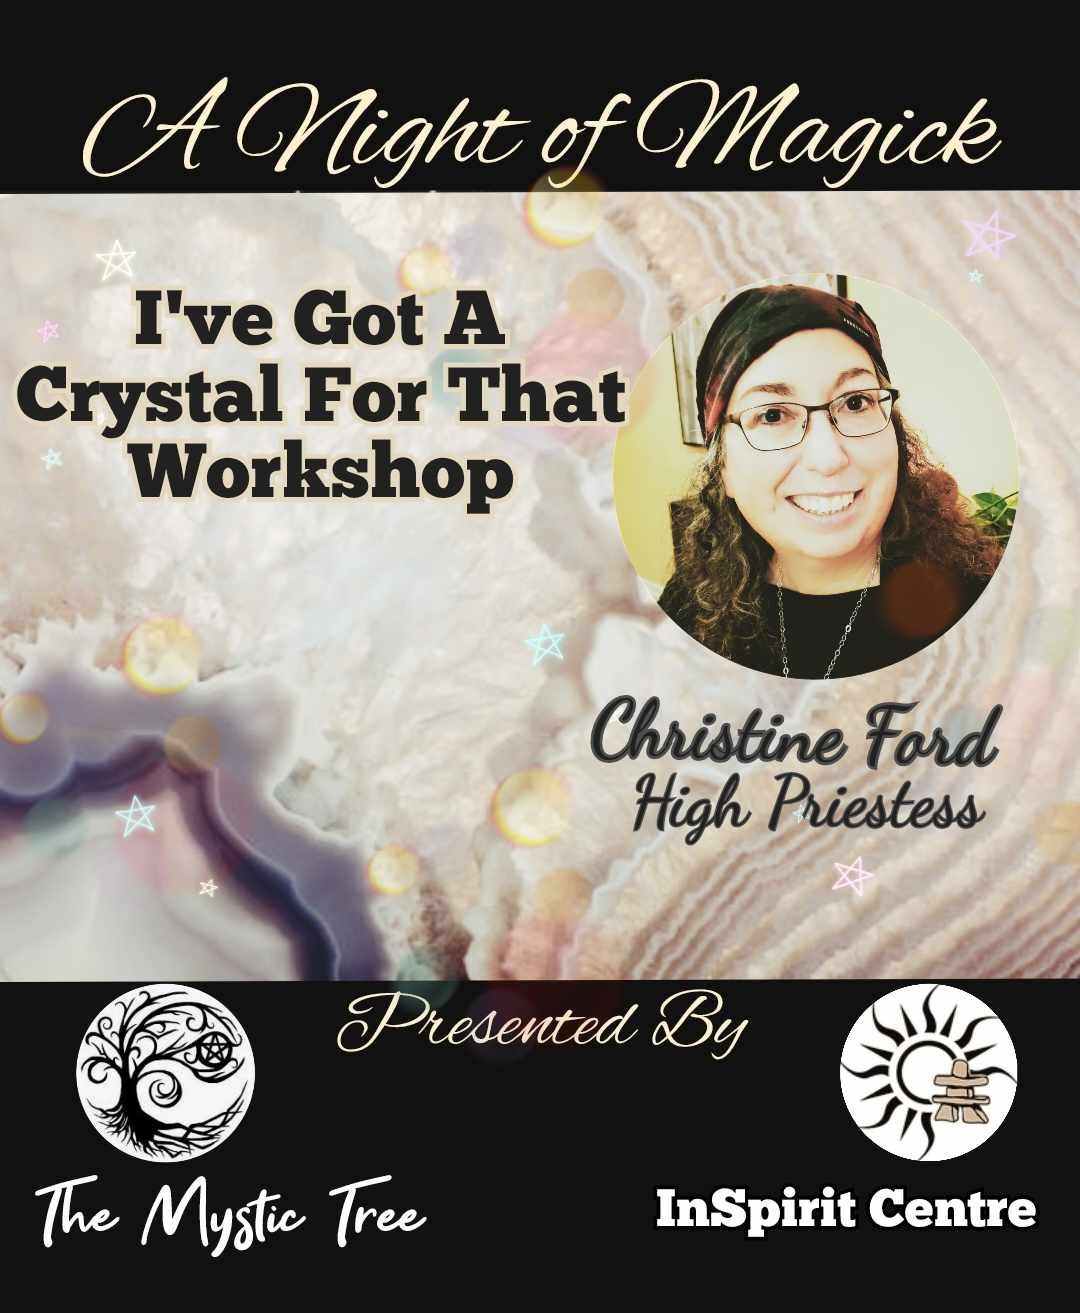 An Evening of Magick with Christine Ford - I Have a Crystal for That!